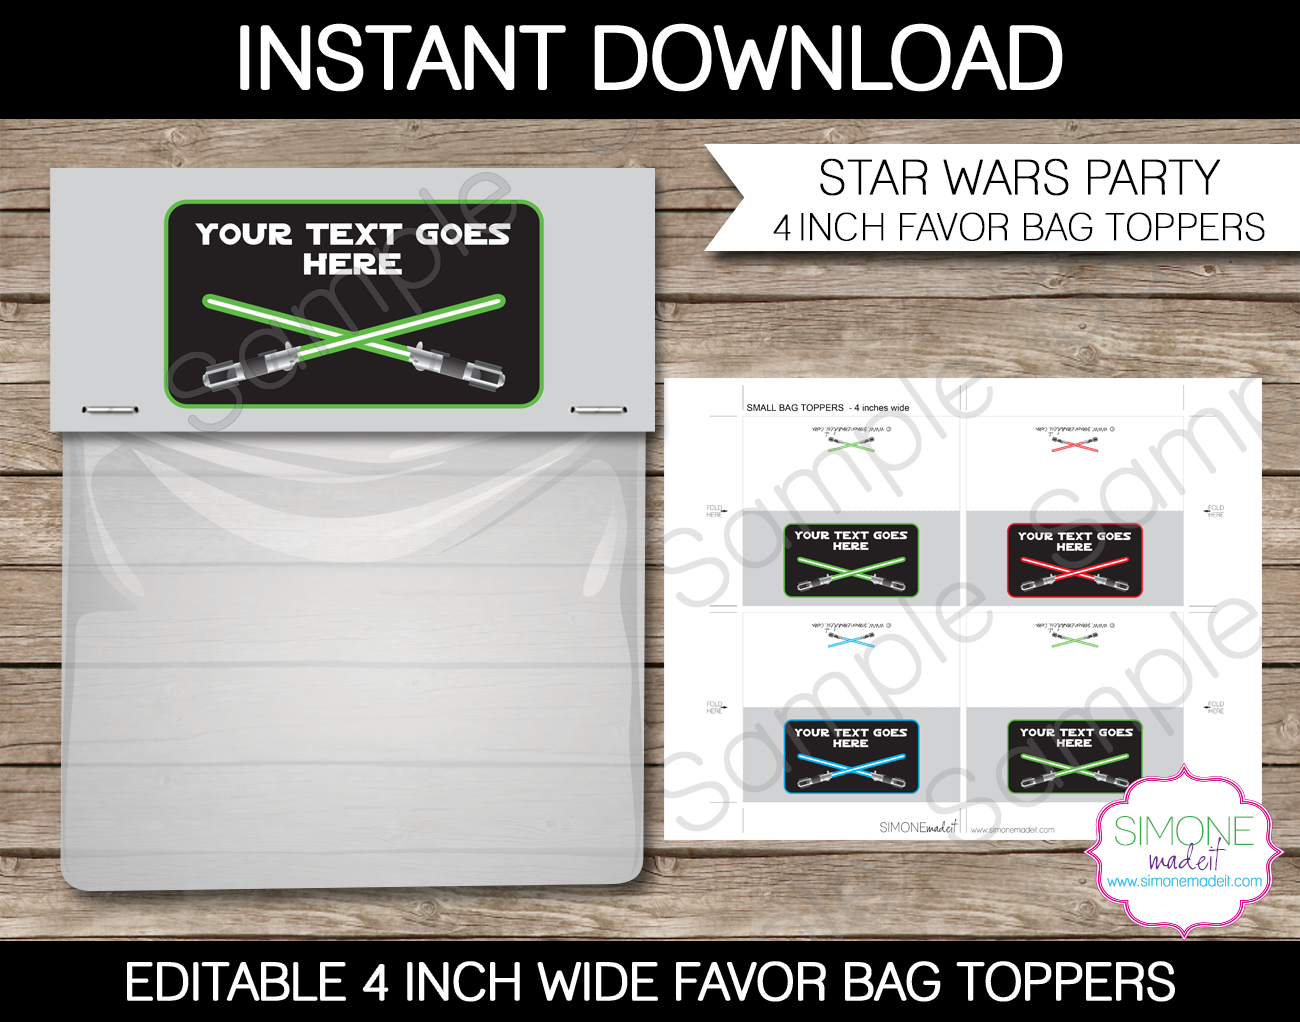 Star Wars Party Favor Bag Toppers | Birthday Party | Editable DIY Template | $3.00 INSTANT DOWNLOAD via SIMONEmadeit.com